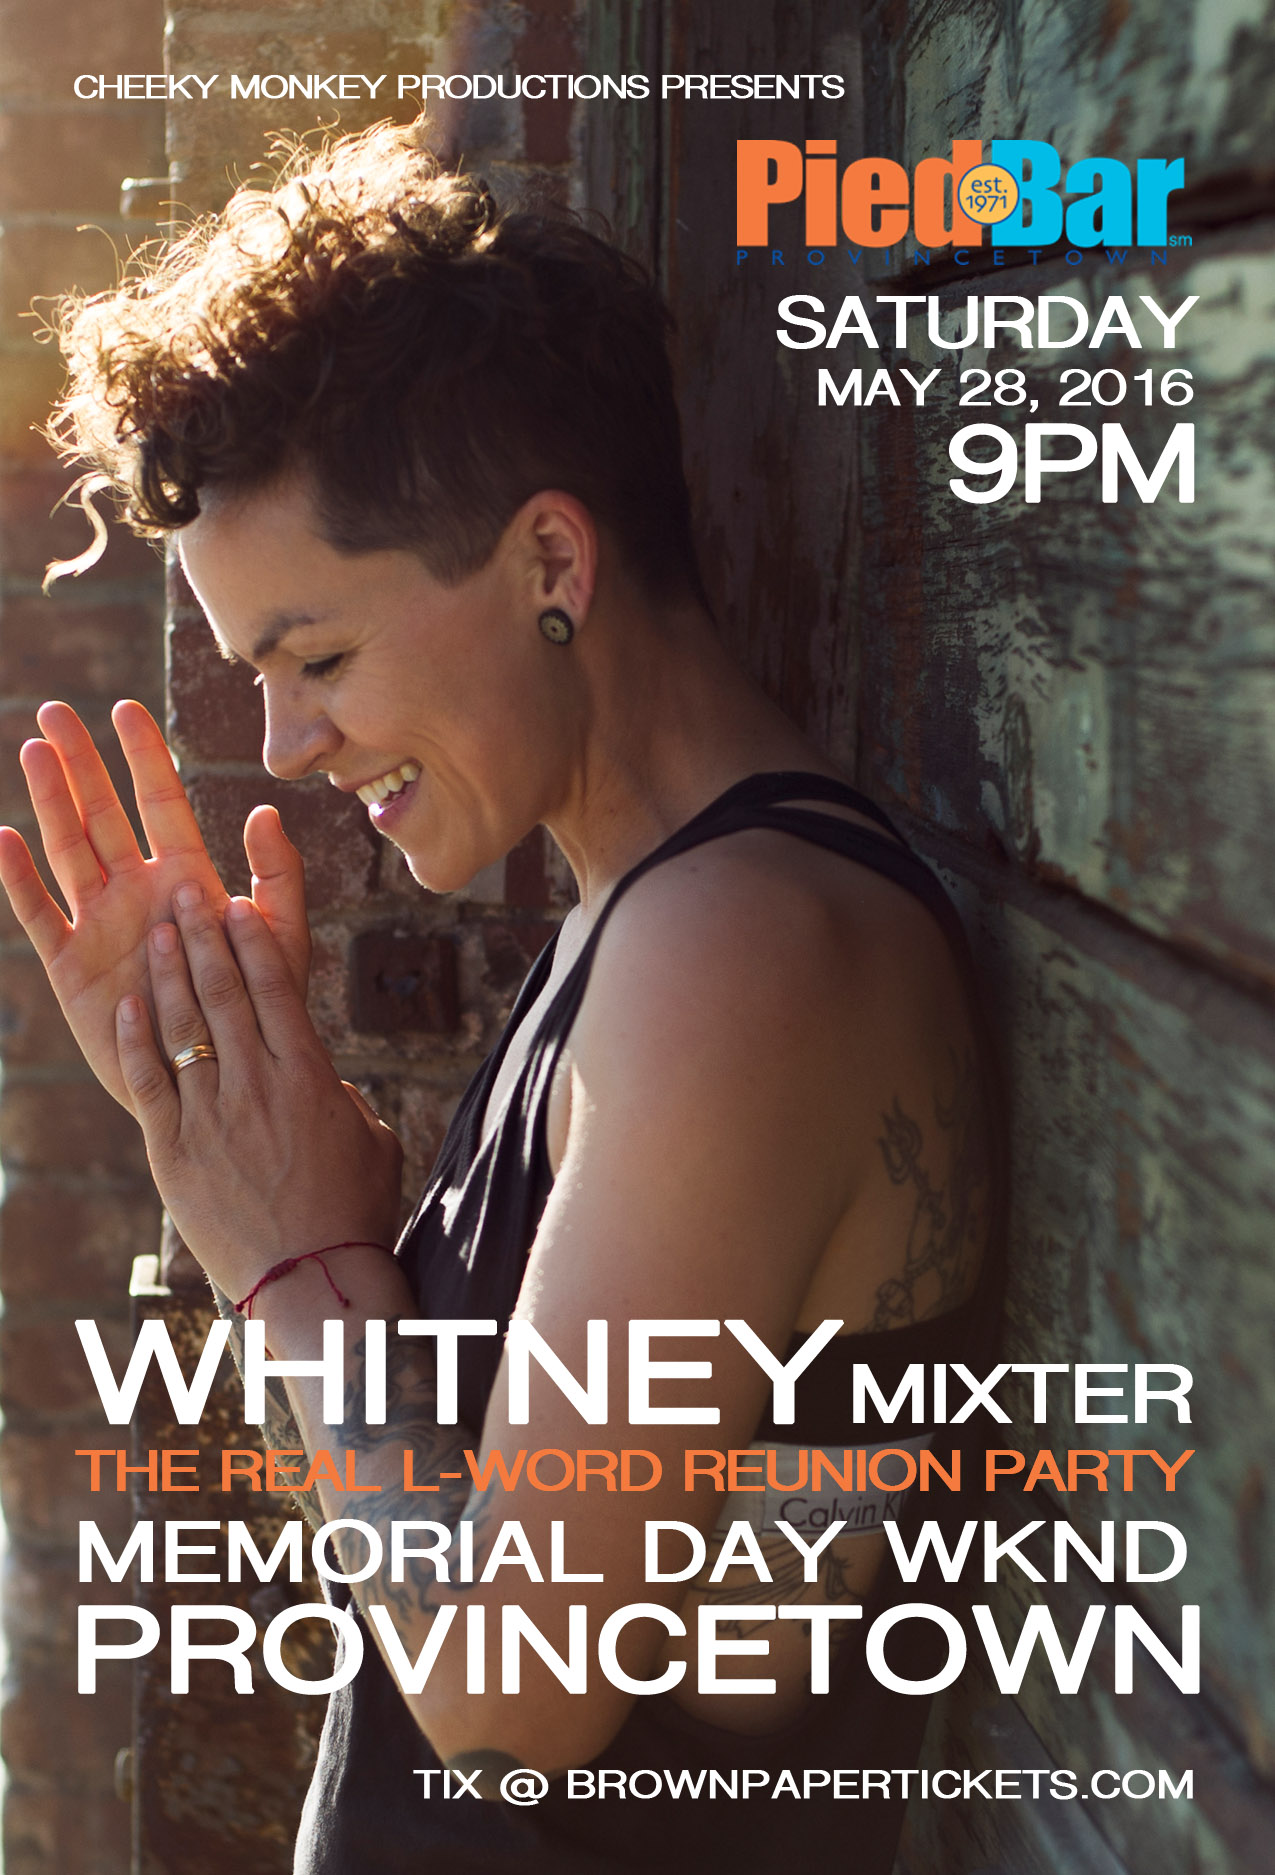 WHITNEY MIXTER MEMORIAL DAY WEEKEND at PIED BAR IN PTOWN [05/28/16]